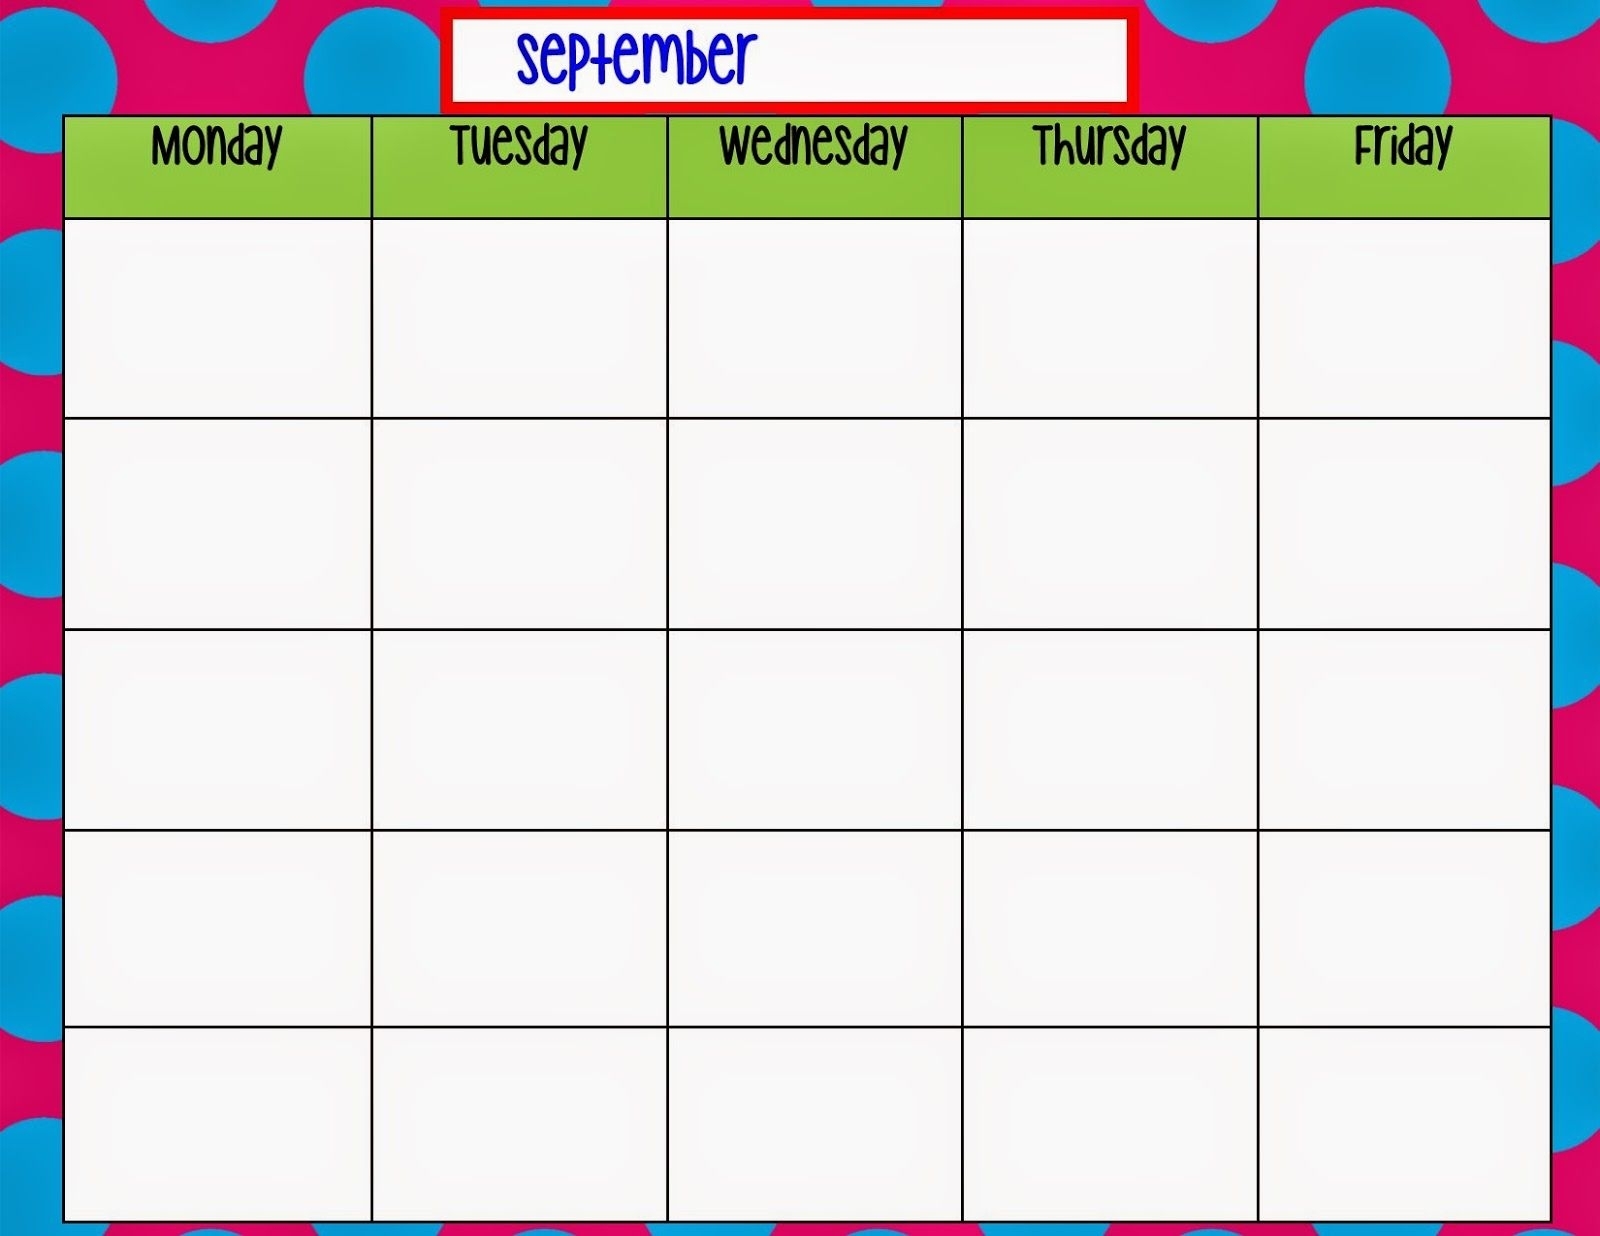 Monday To Friday Schedule in Monday To Friday Timetable Template